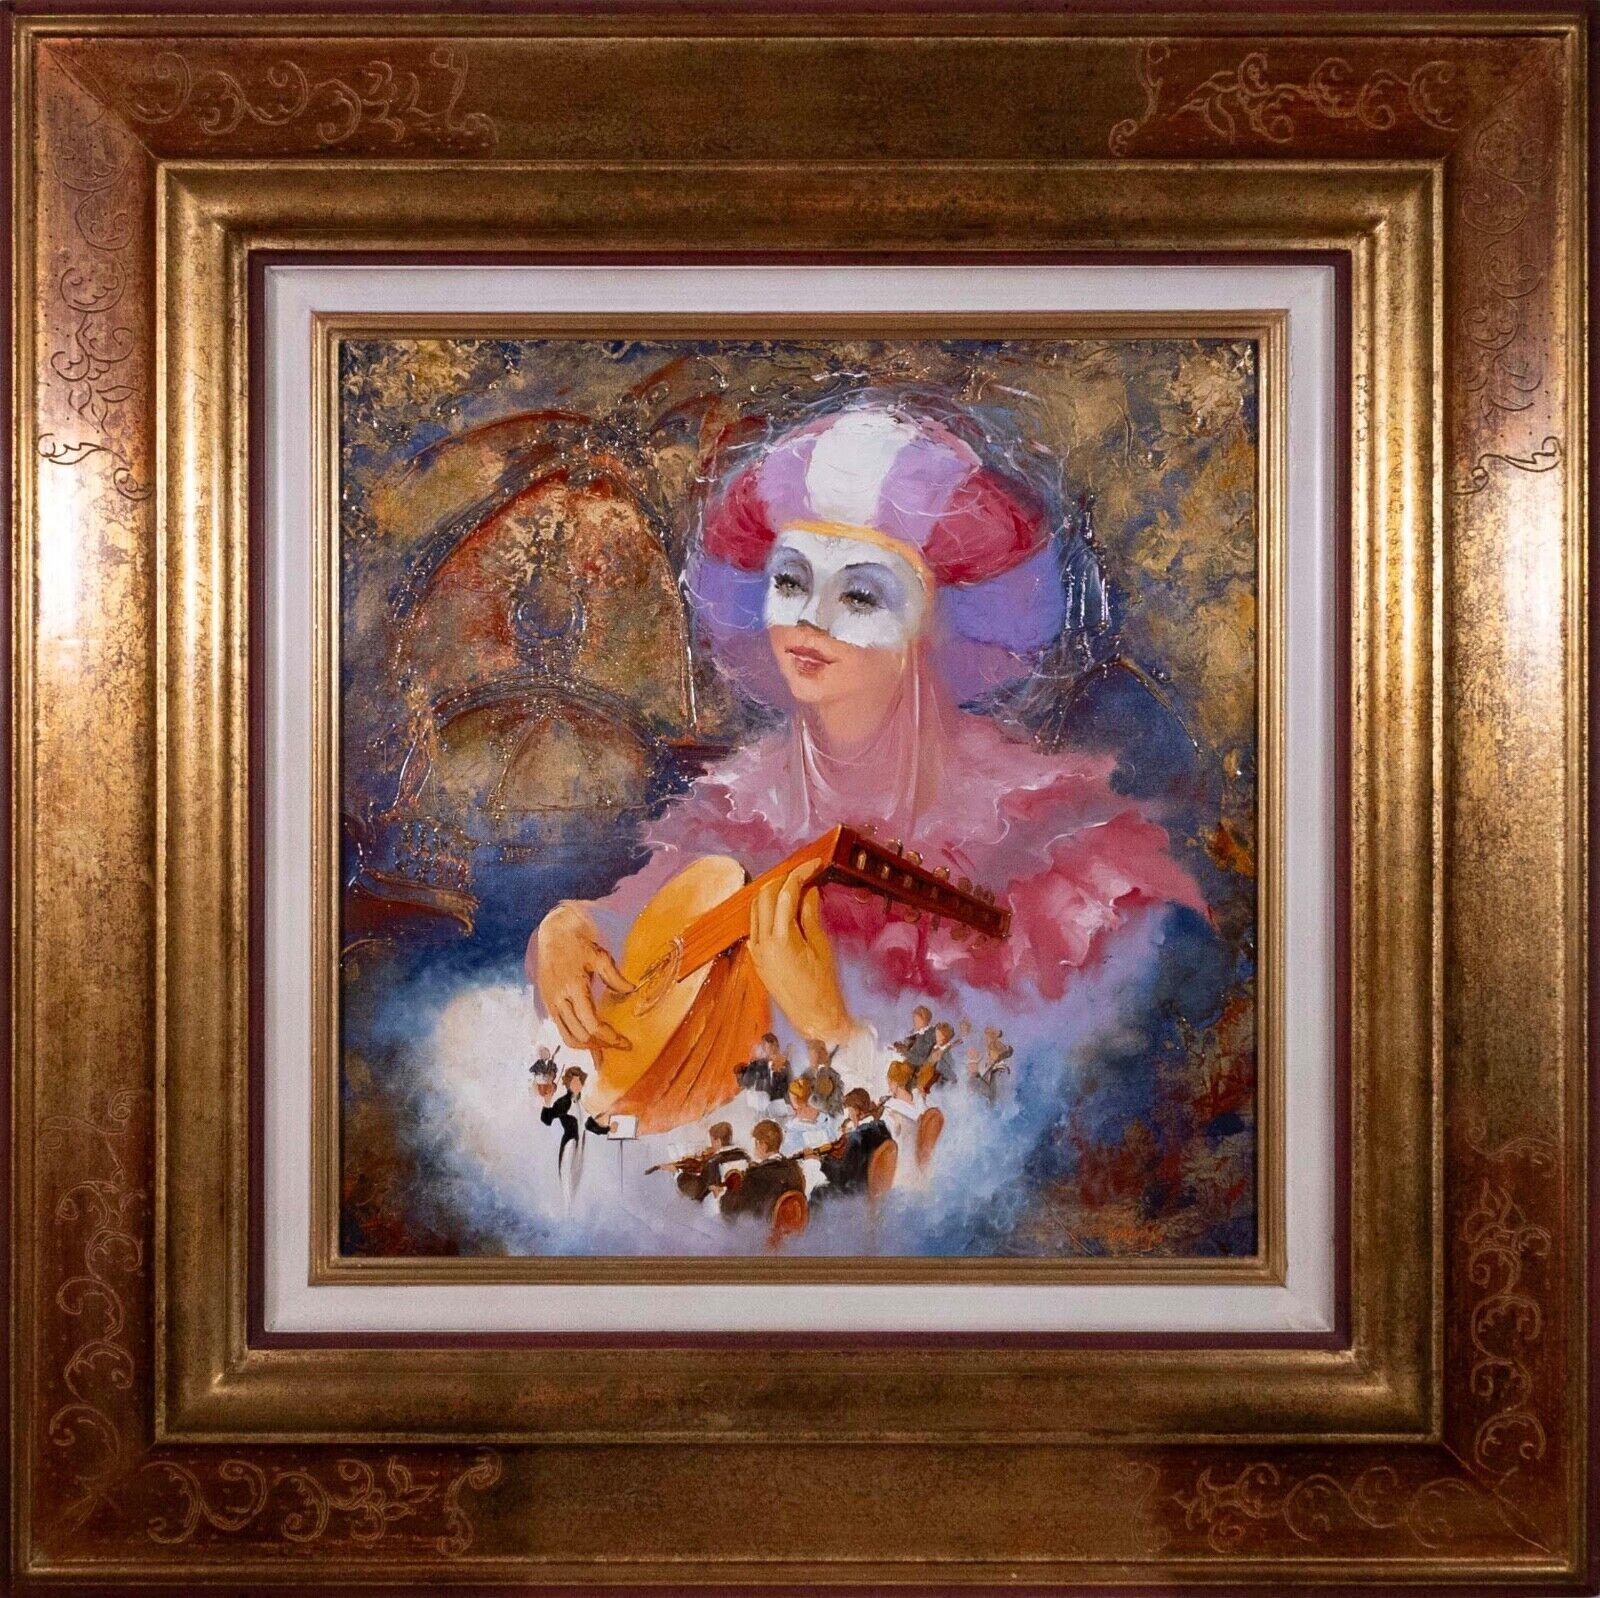 A contemporary surreal oil painting on canvas titled “Bal de l’Opera” by George Corominas. Signed bottom right and titled on verso. A dreamlike composition with musical themes with a nod to “Carnivale” or Mardi Gras. The artist used a thick impasto